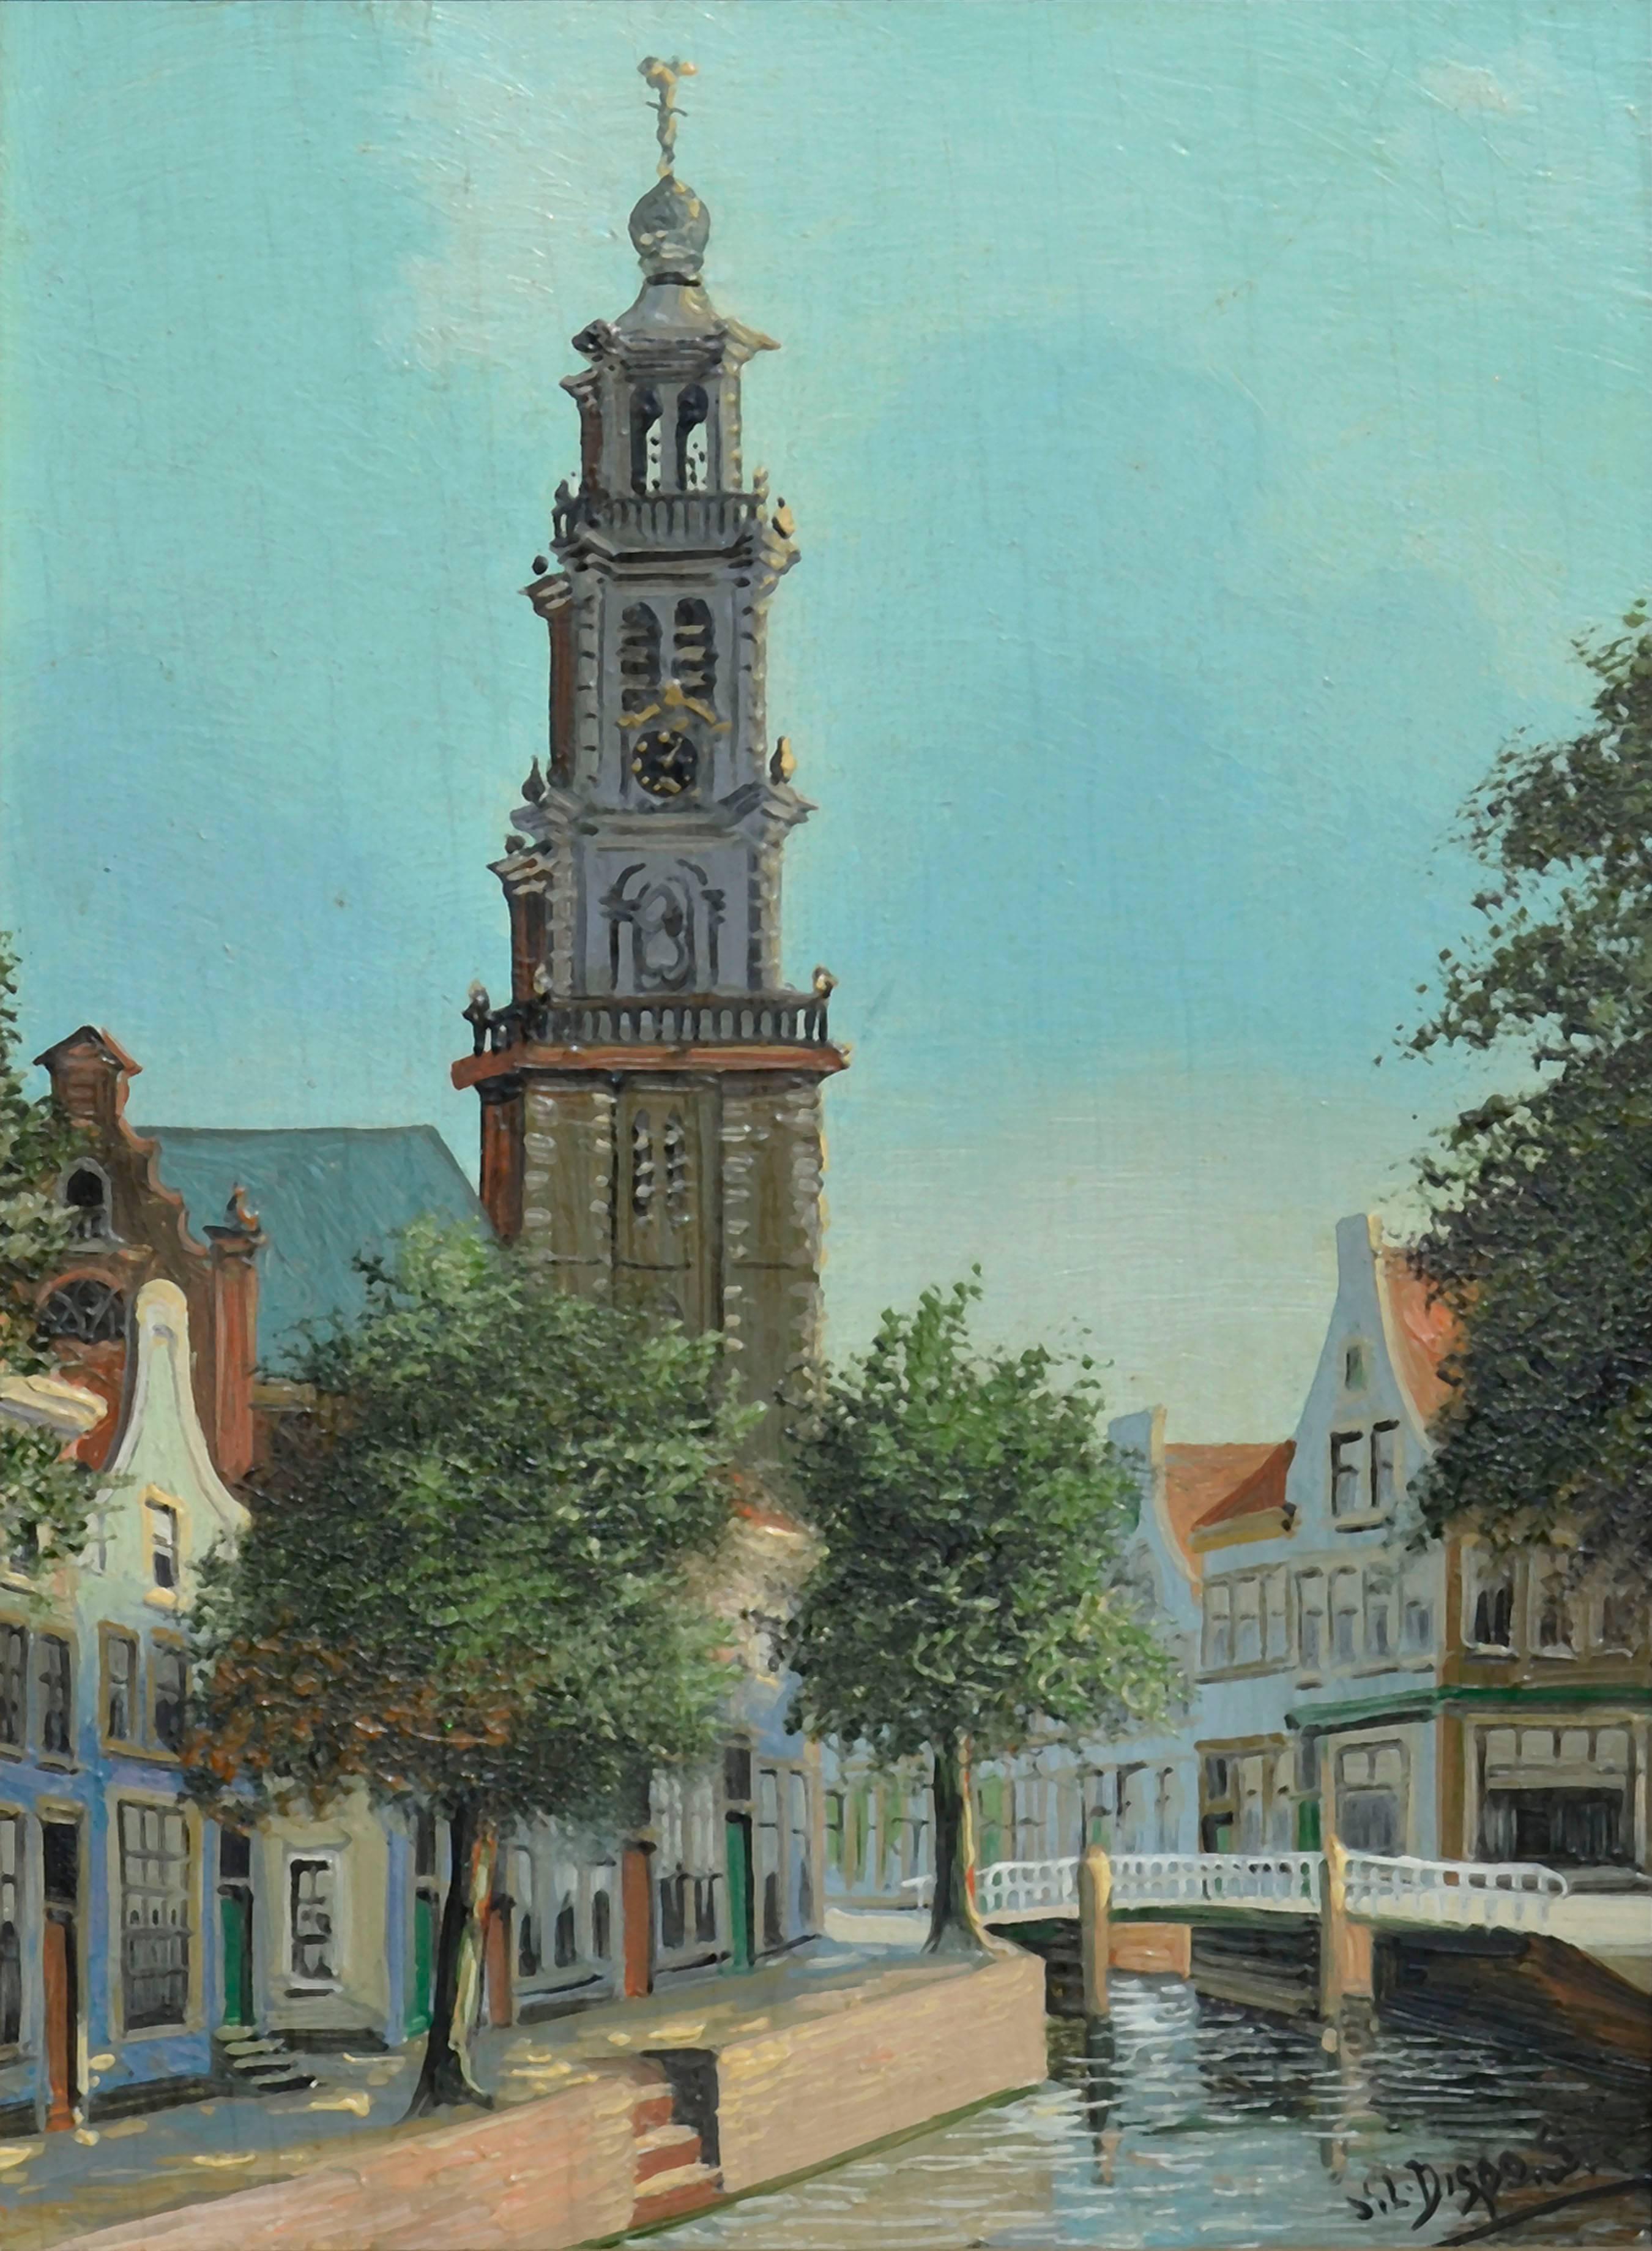 Cathedral of St. Bavo, Haarlem, The Netherlands - Painting by Jacobus Lambertus Dispo Sr.